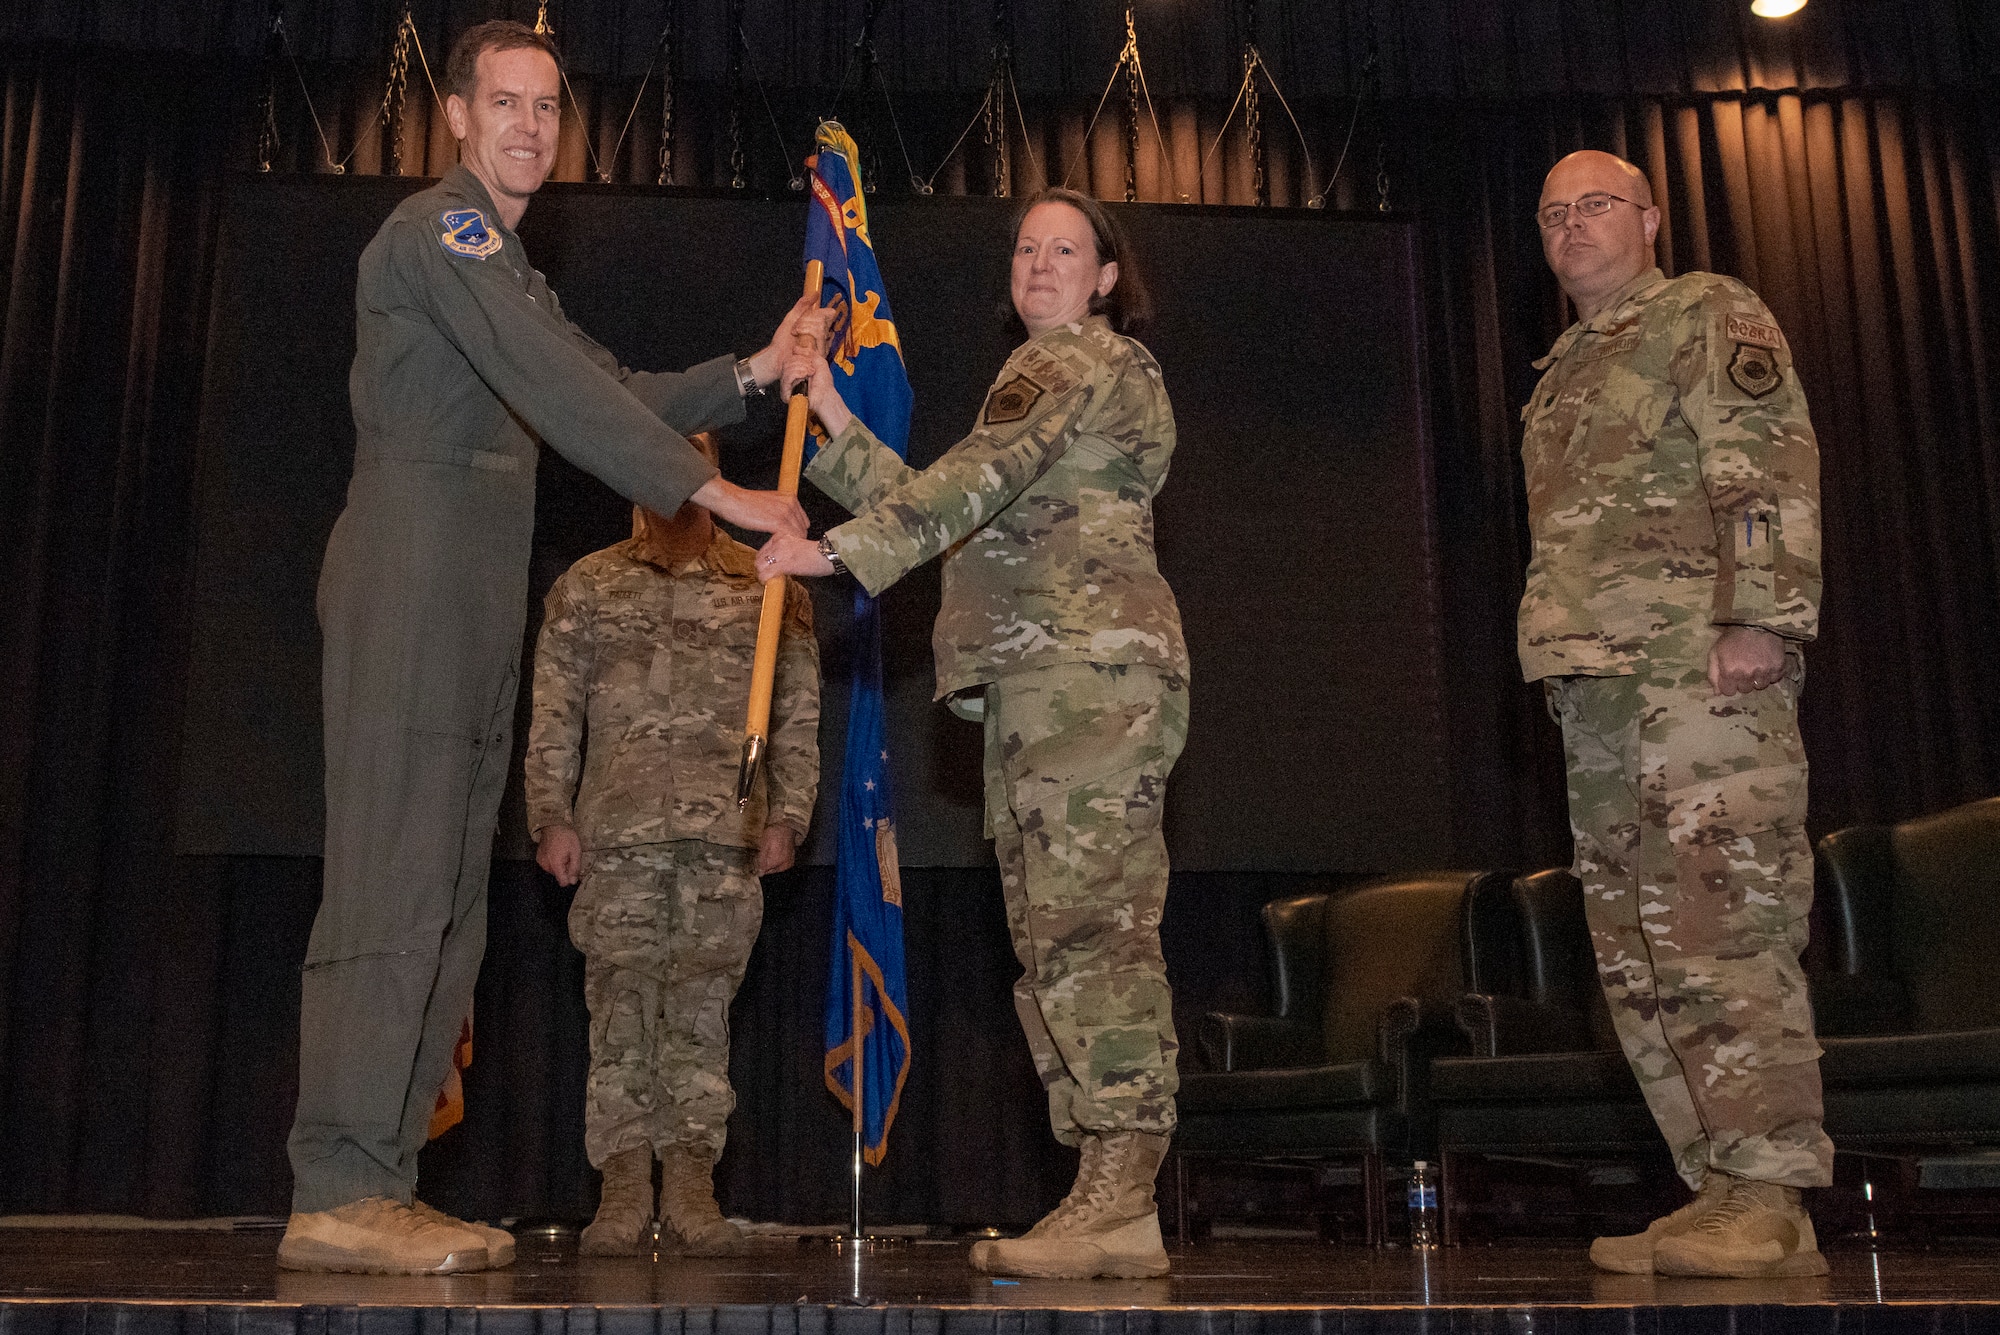 621st Air Control Squadron held a change of command ceremony at Osan Air Base, Republic of Korea, May 17, 2021.